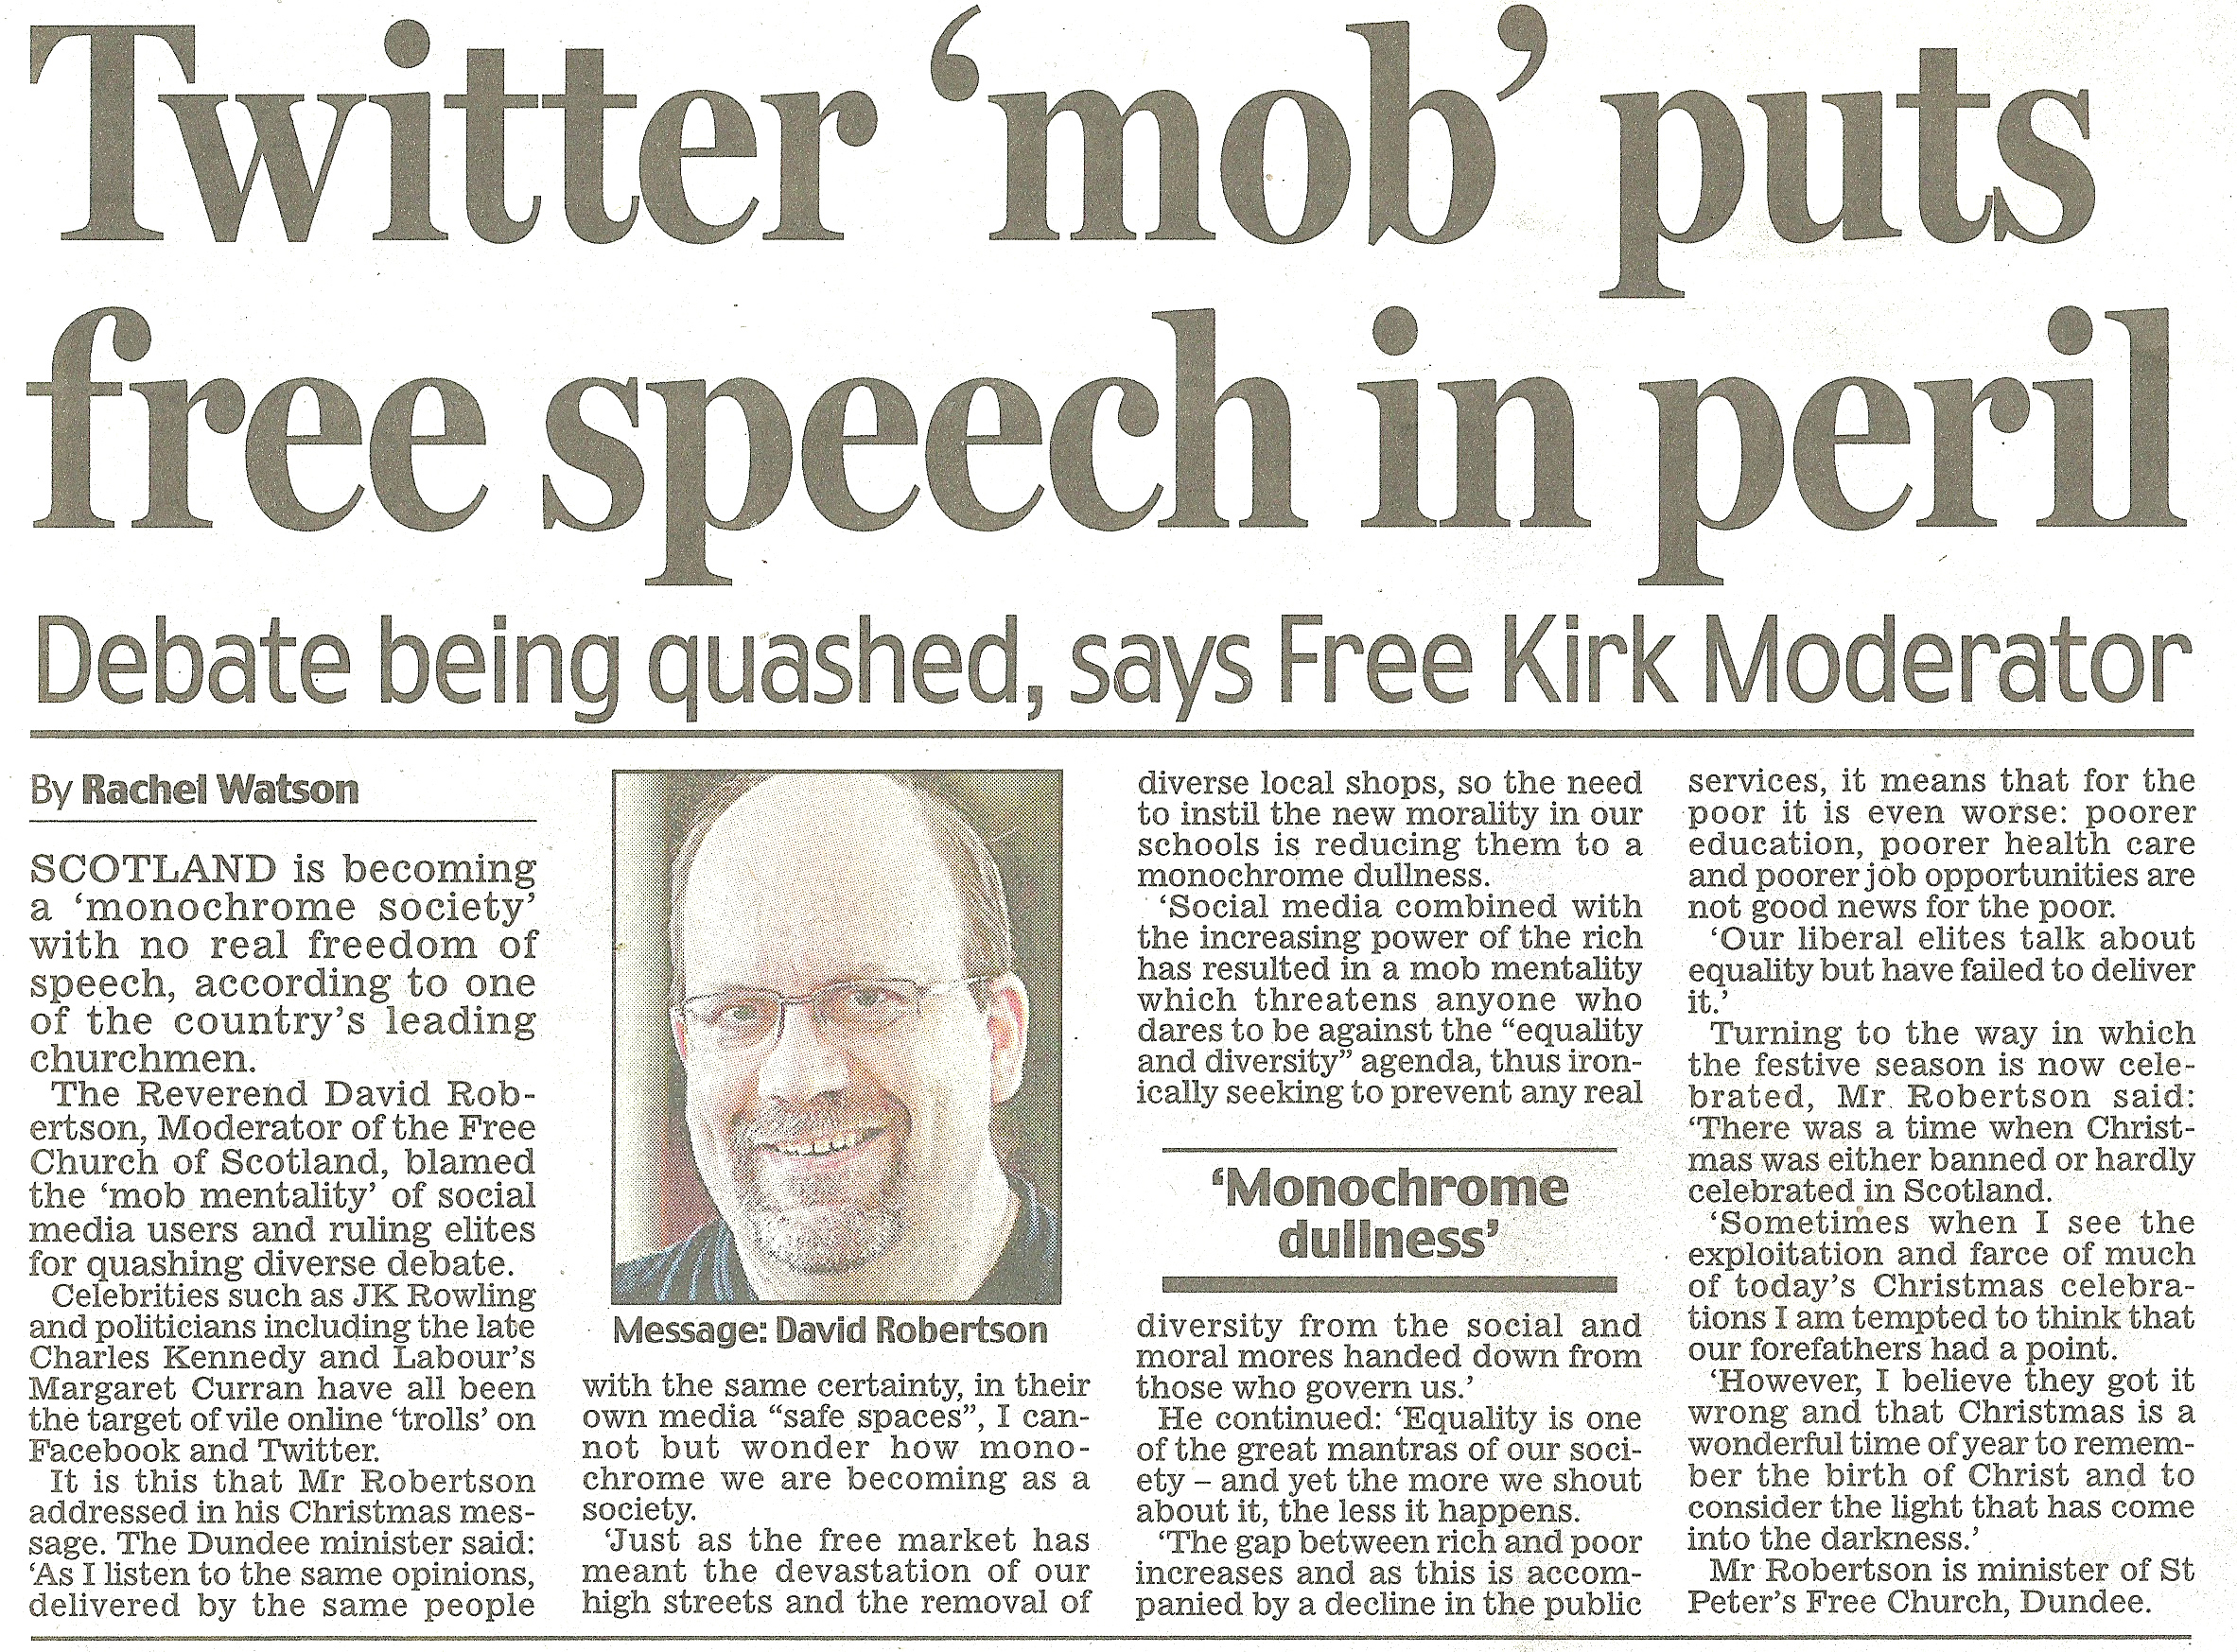 Scottish Daily Mail 22-12-15 - Twitter mob puts free speech in peril